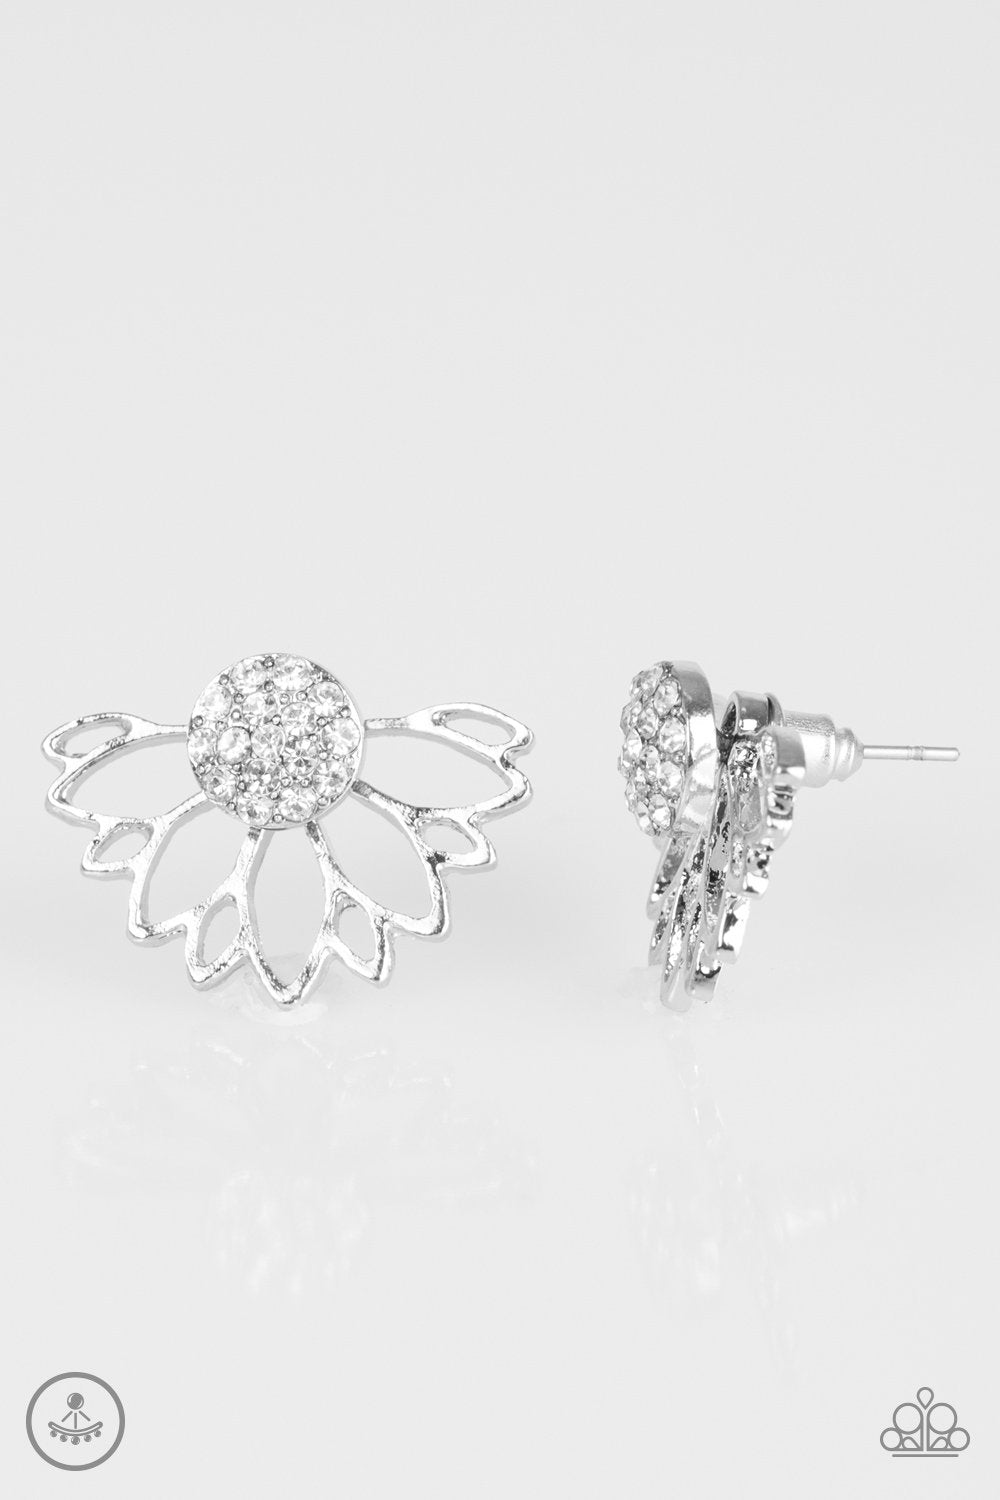 A Fan Fave White and Silver Double-sided Post Earrings - Paparazzi Accessories- lightbox - CarasShop.com - $5 Jewelry by Cara Jewels